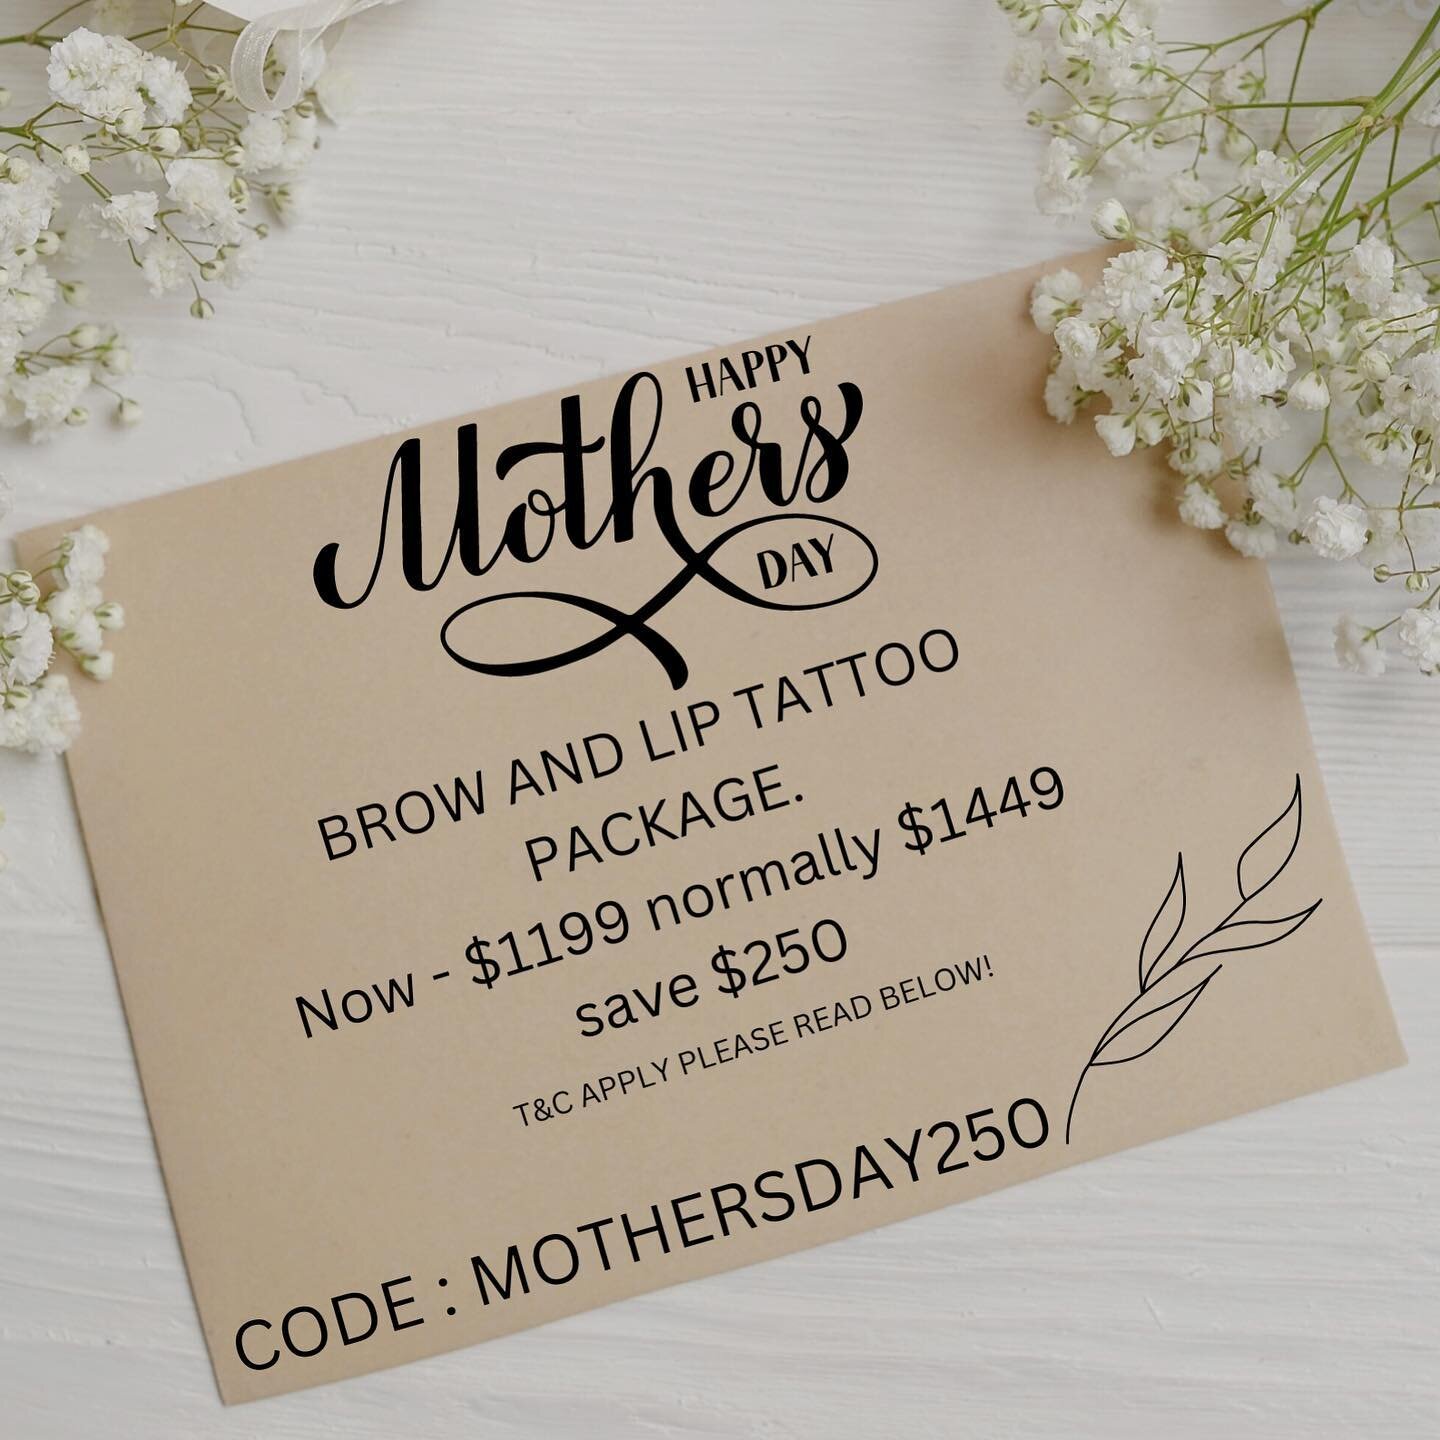 Mothers Day Package! 

Treat yourself or your loved ones with this amazing promo package!
Eyebrow and Lip tattoo!
Now $1199 down from $1449
Saving a massive $250 

🛑PLEASE READ BELOW ⬇️ 
- Must be 18 years old and over 
- Can not be used with any ot